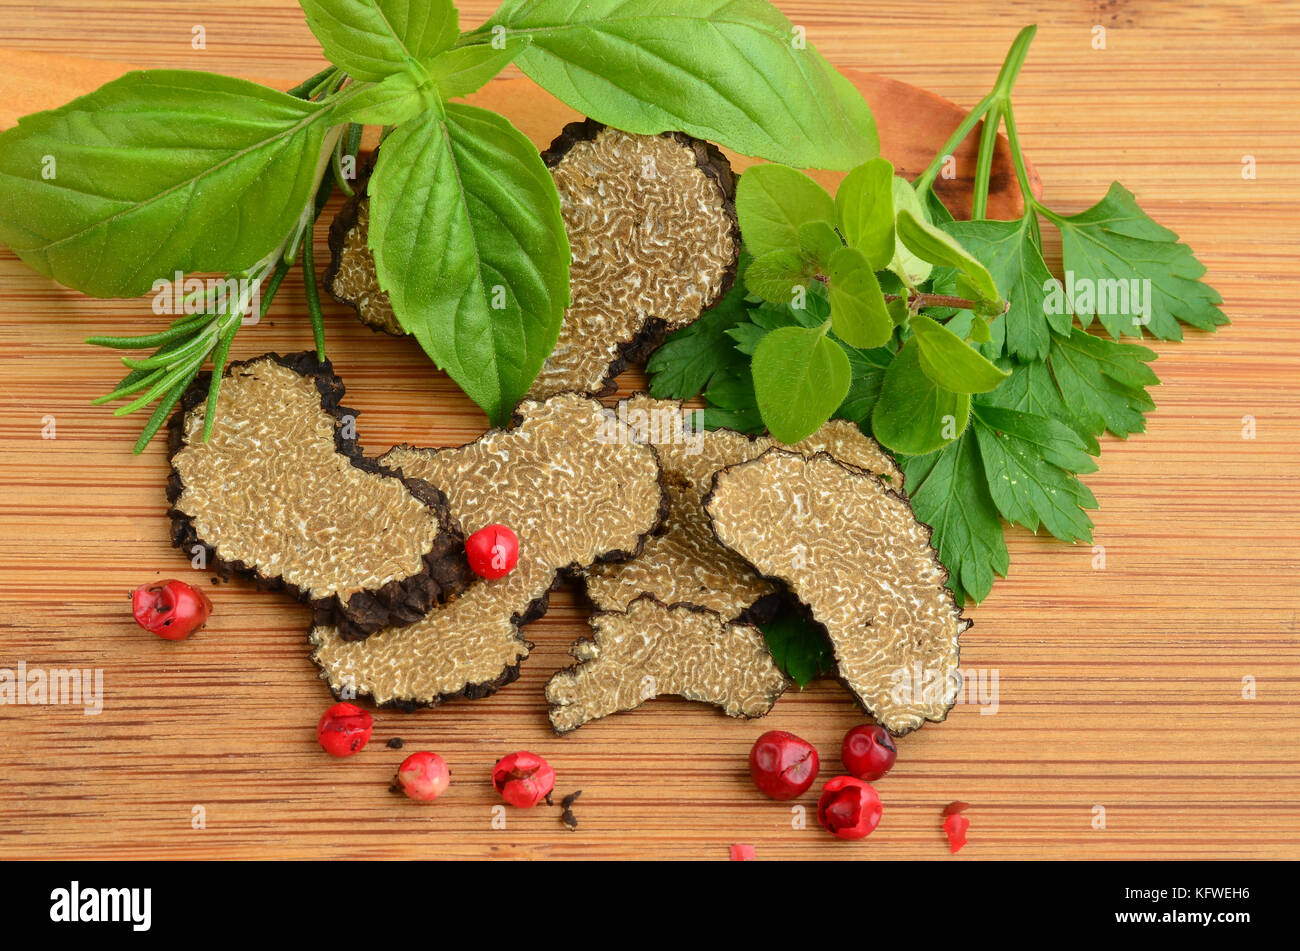 Sliced black truffle with fresh, green aromatic plants and red pepper on wooden background Stock Photo